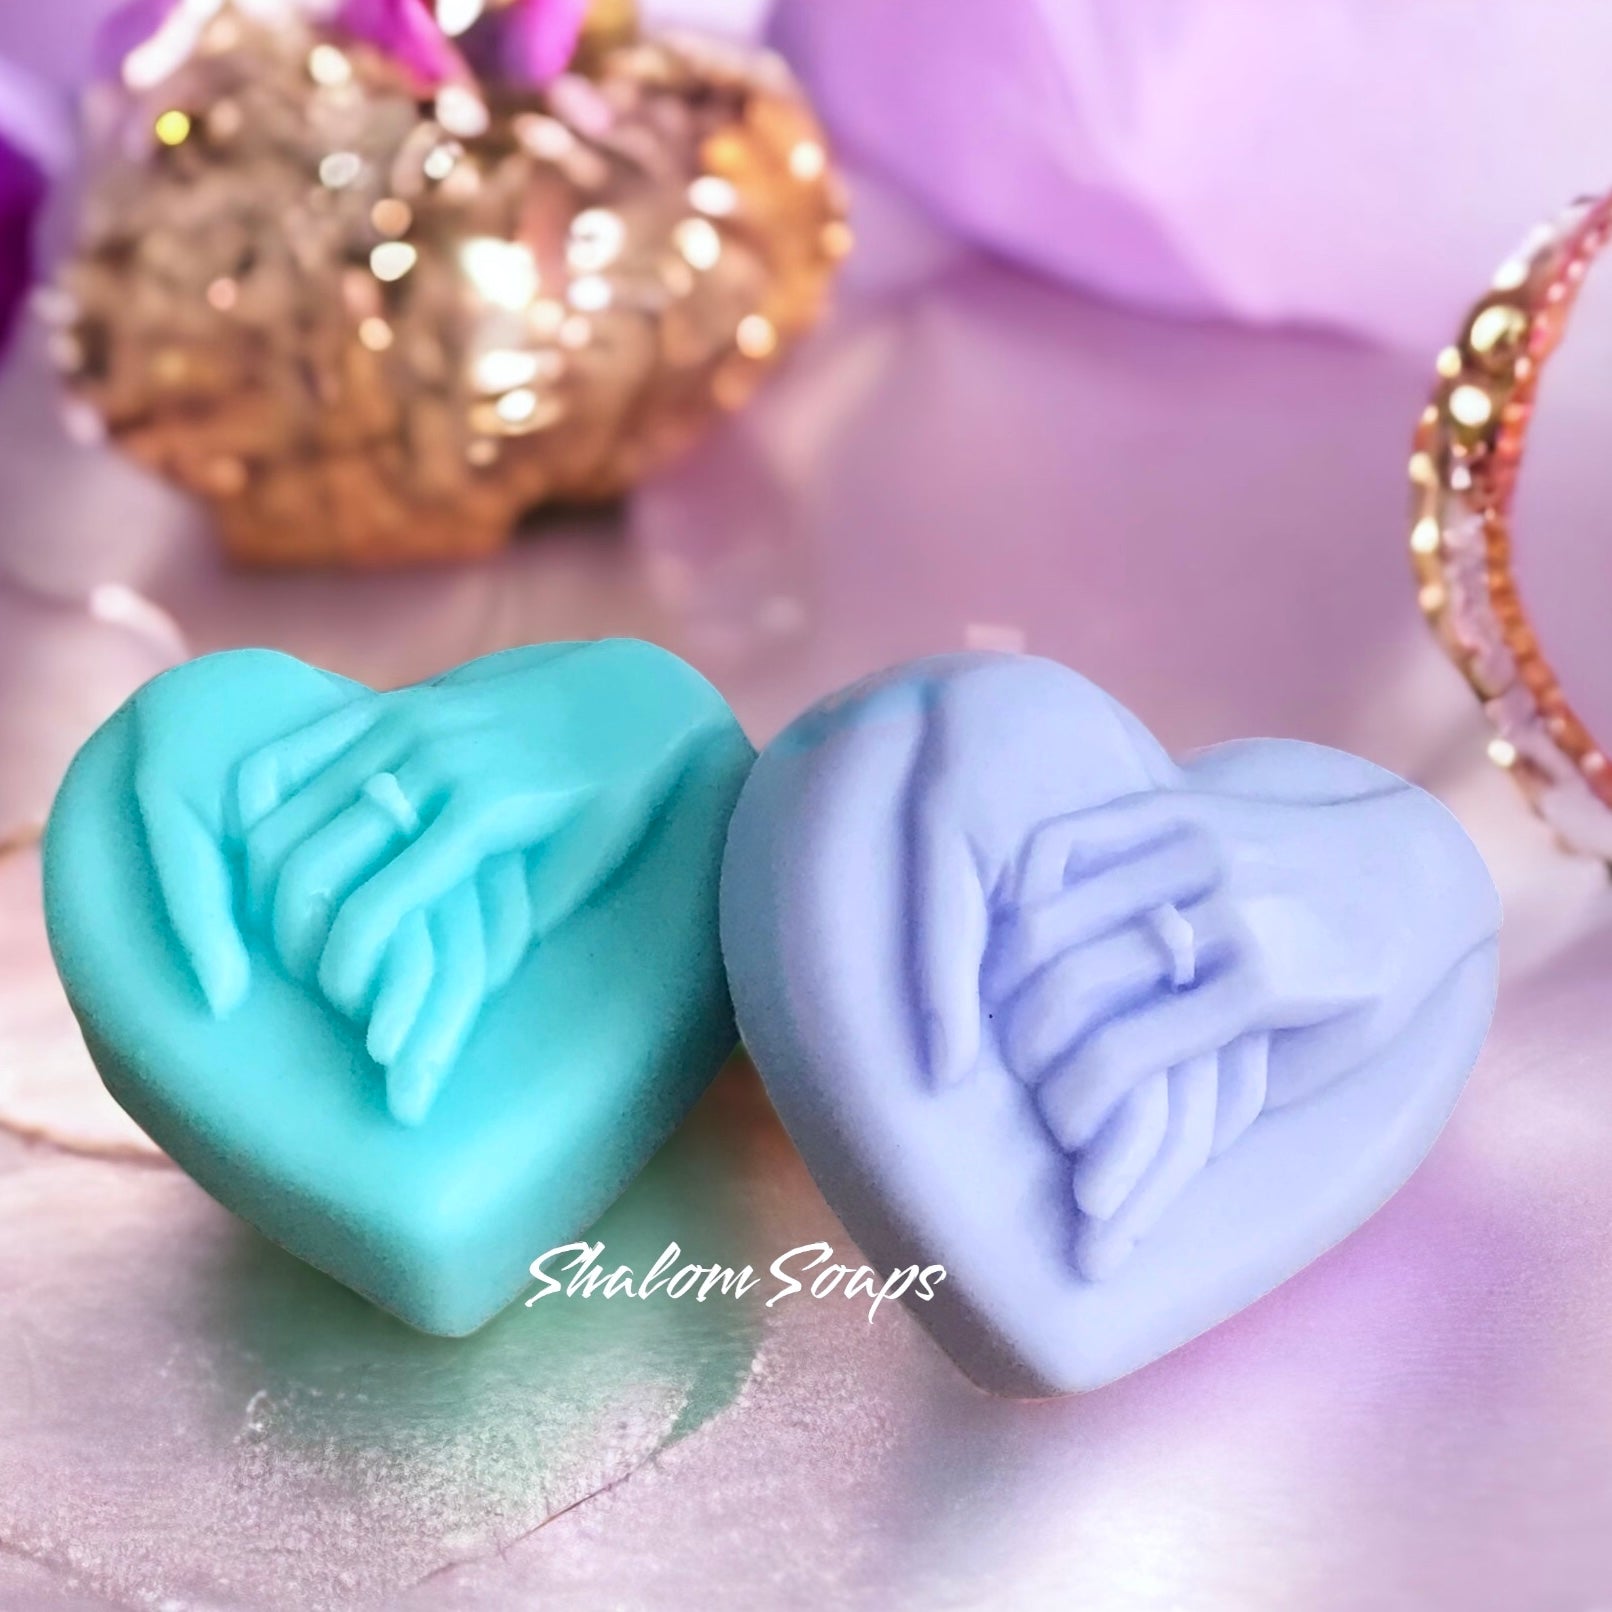 Holding Hands Heart Soap